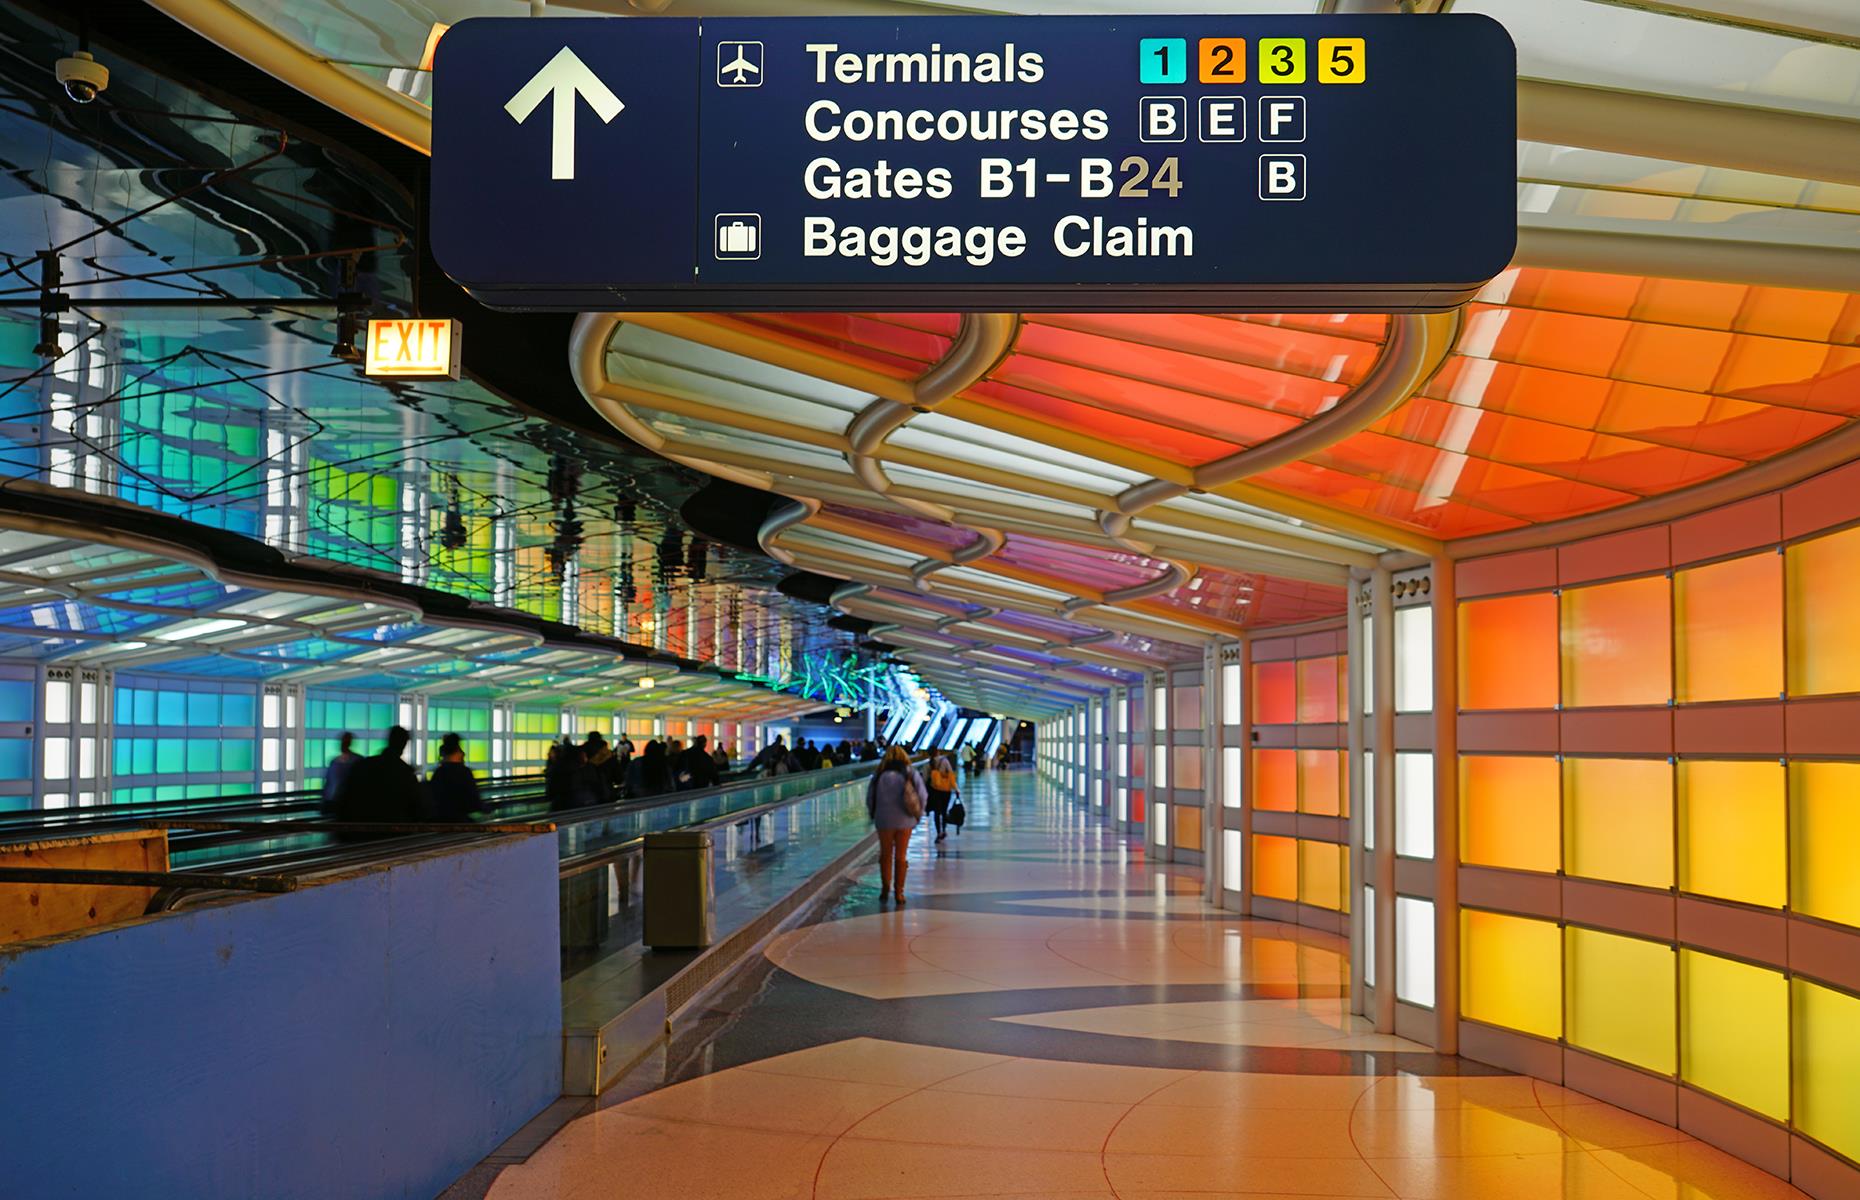 <p>O'Hare International Airport is located in the Chicago area and serves the Midwest and many destinations around the world. Scoring low for passenger satisfaction with just 758 out of 1,000 points, this airport that was once ground-breaking in design when first built now needs modernization.</p>  <p><a href="https://www.loveexploring.com/galleries/93082/they-built-these-amazing-airports-then-abandoned-them?page=1"><strong>Take a look at these once-amazing airports that are now abandoned</strong></a></p>